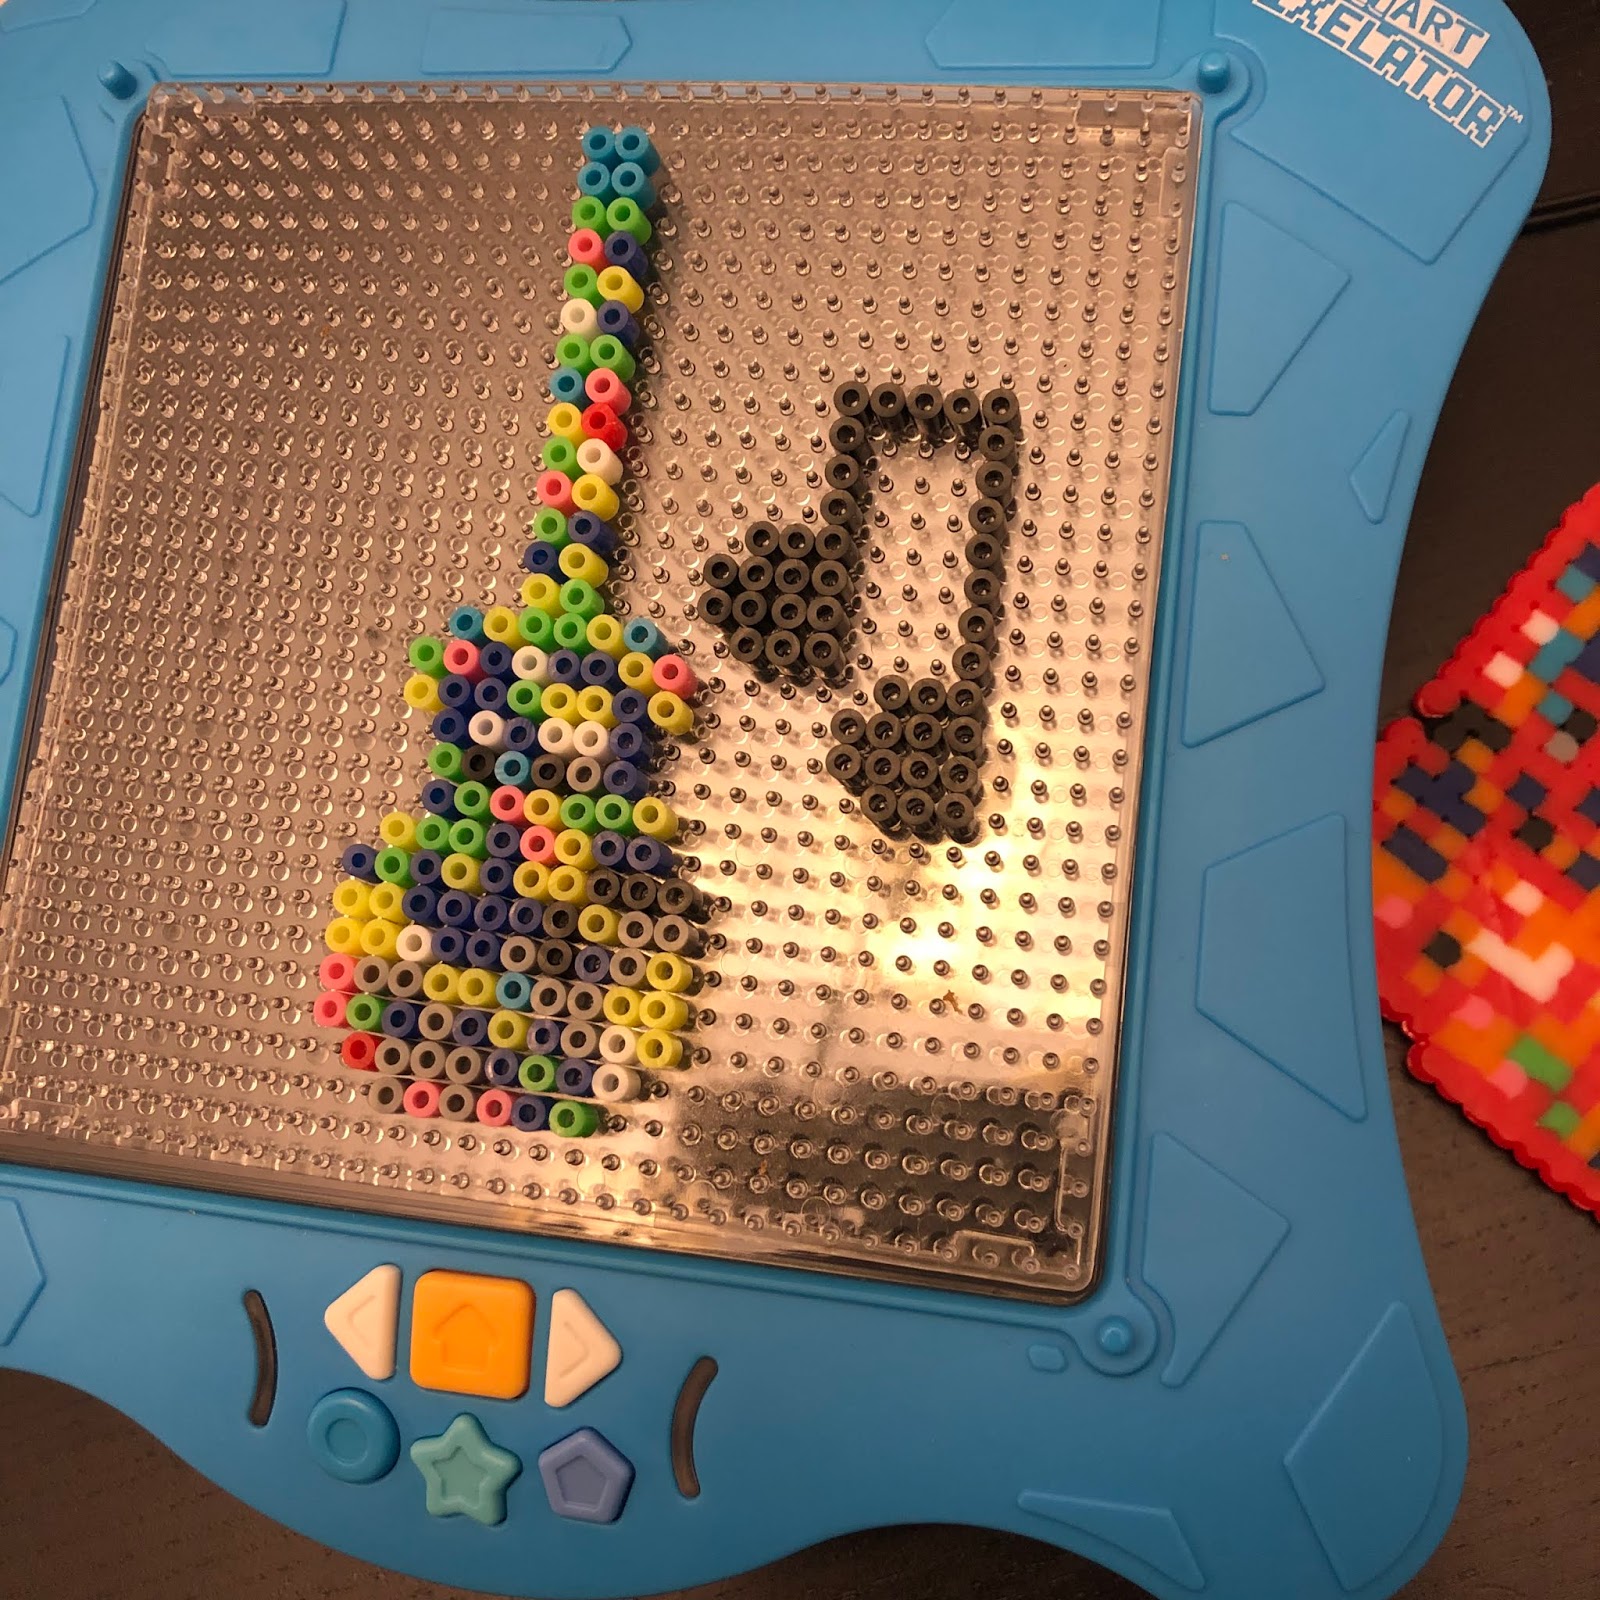 Play, Live, Repeat  Product Reviews, Family, NYC Life: Hot Toy Alert! smART  Pixelator Pixelate Any Image! Arts and Crafts Kit for Kids, Perler Bead Kit  Review!